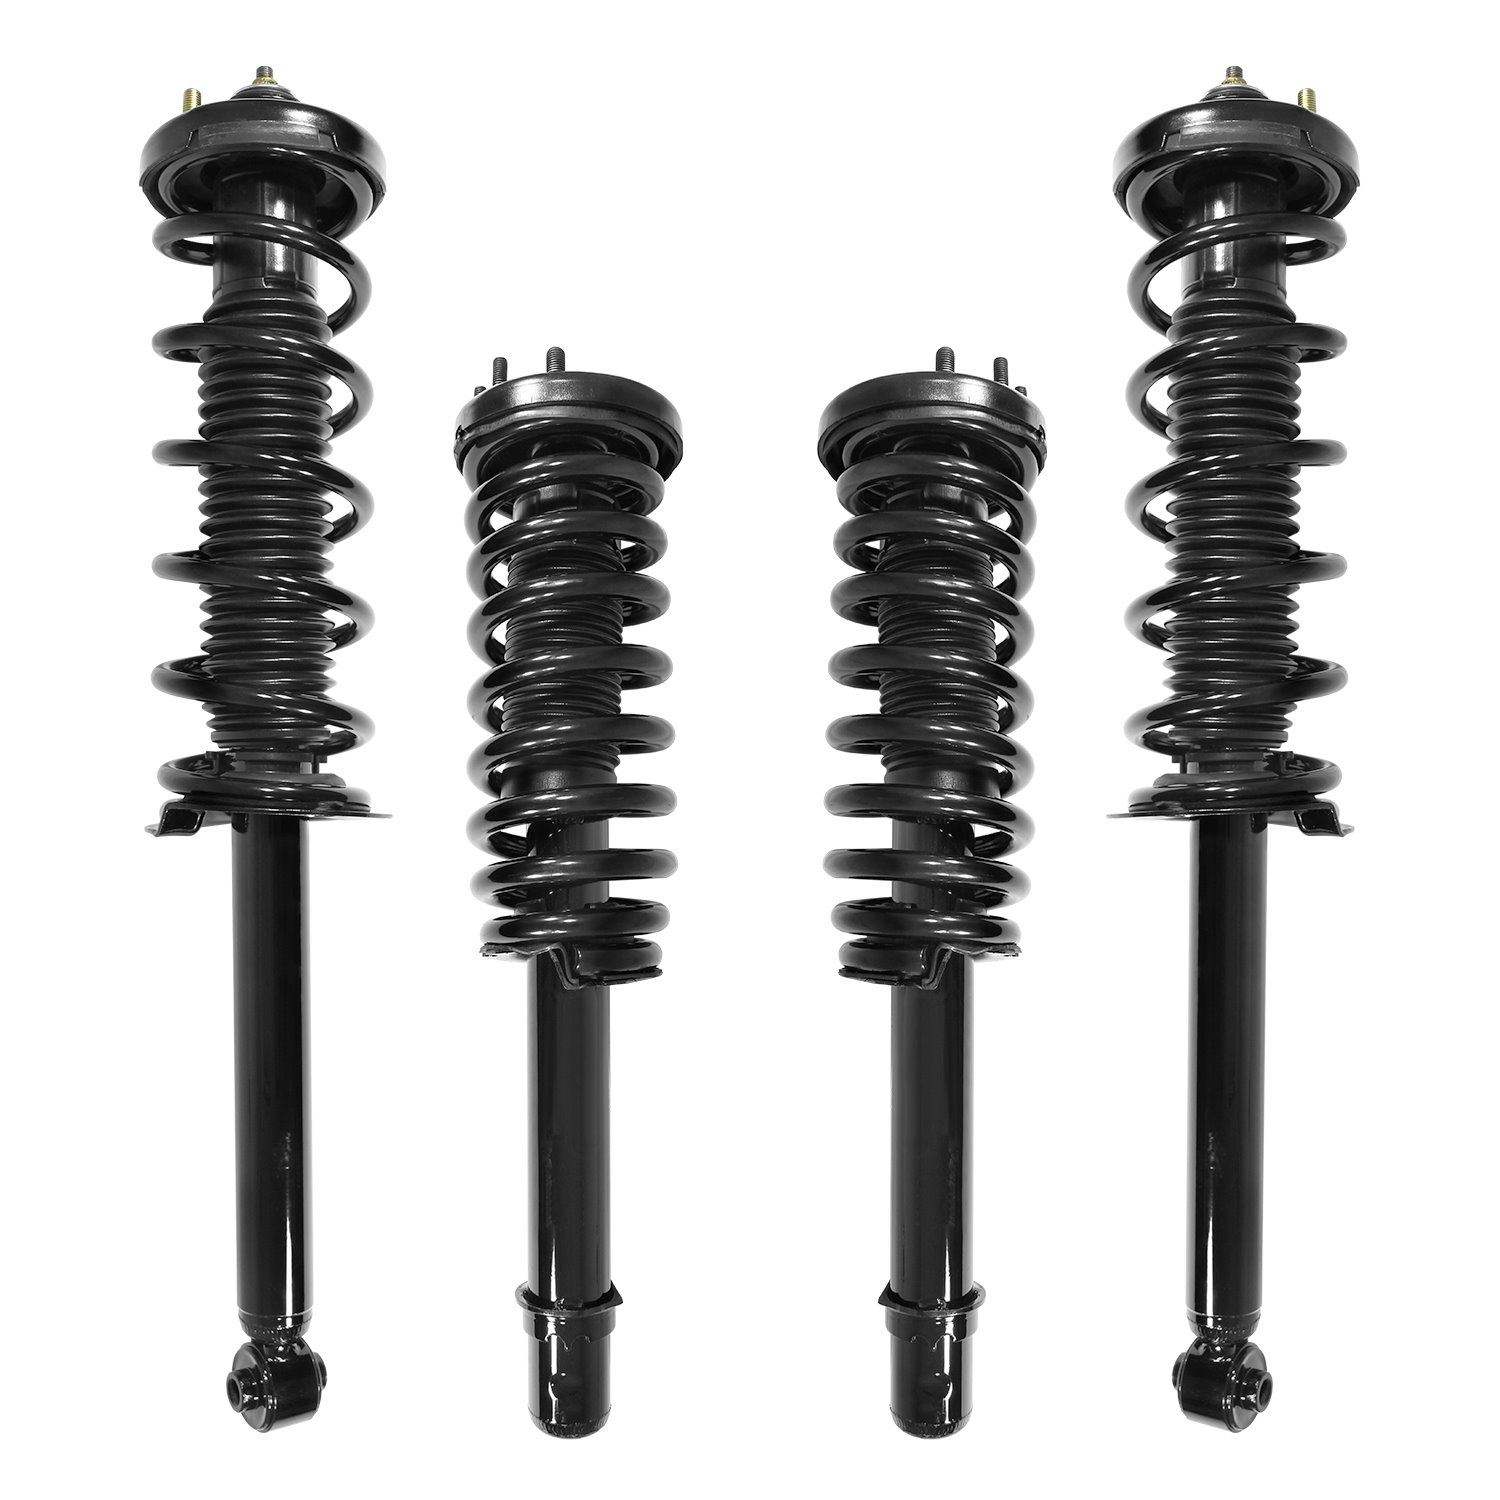 4-11871-15050-001 Front & Rear Suspension Strut & Coil Spring Assembly Kit Fits Select Honda Accord